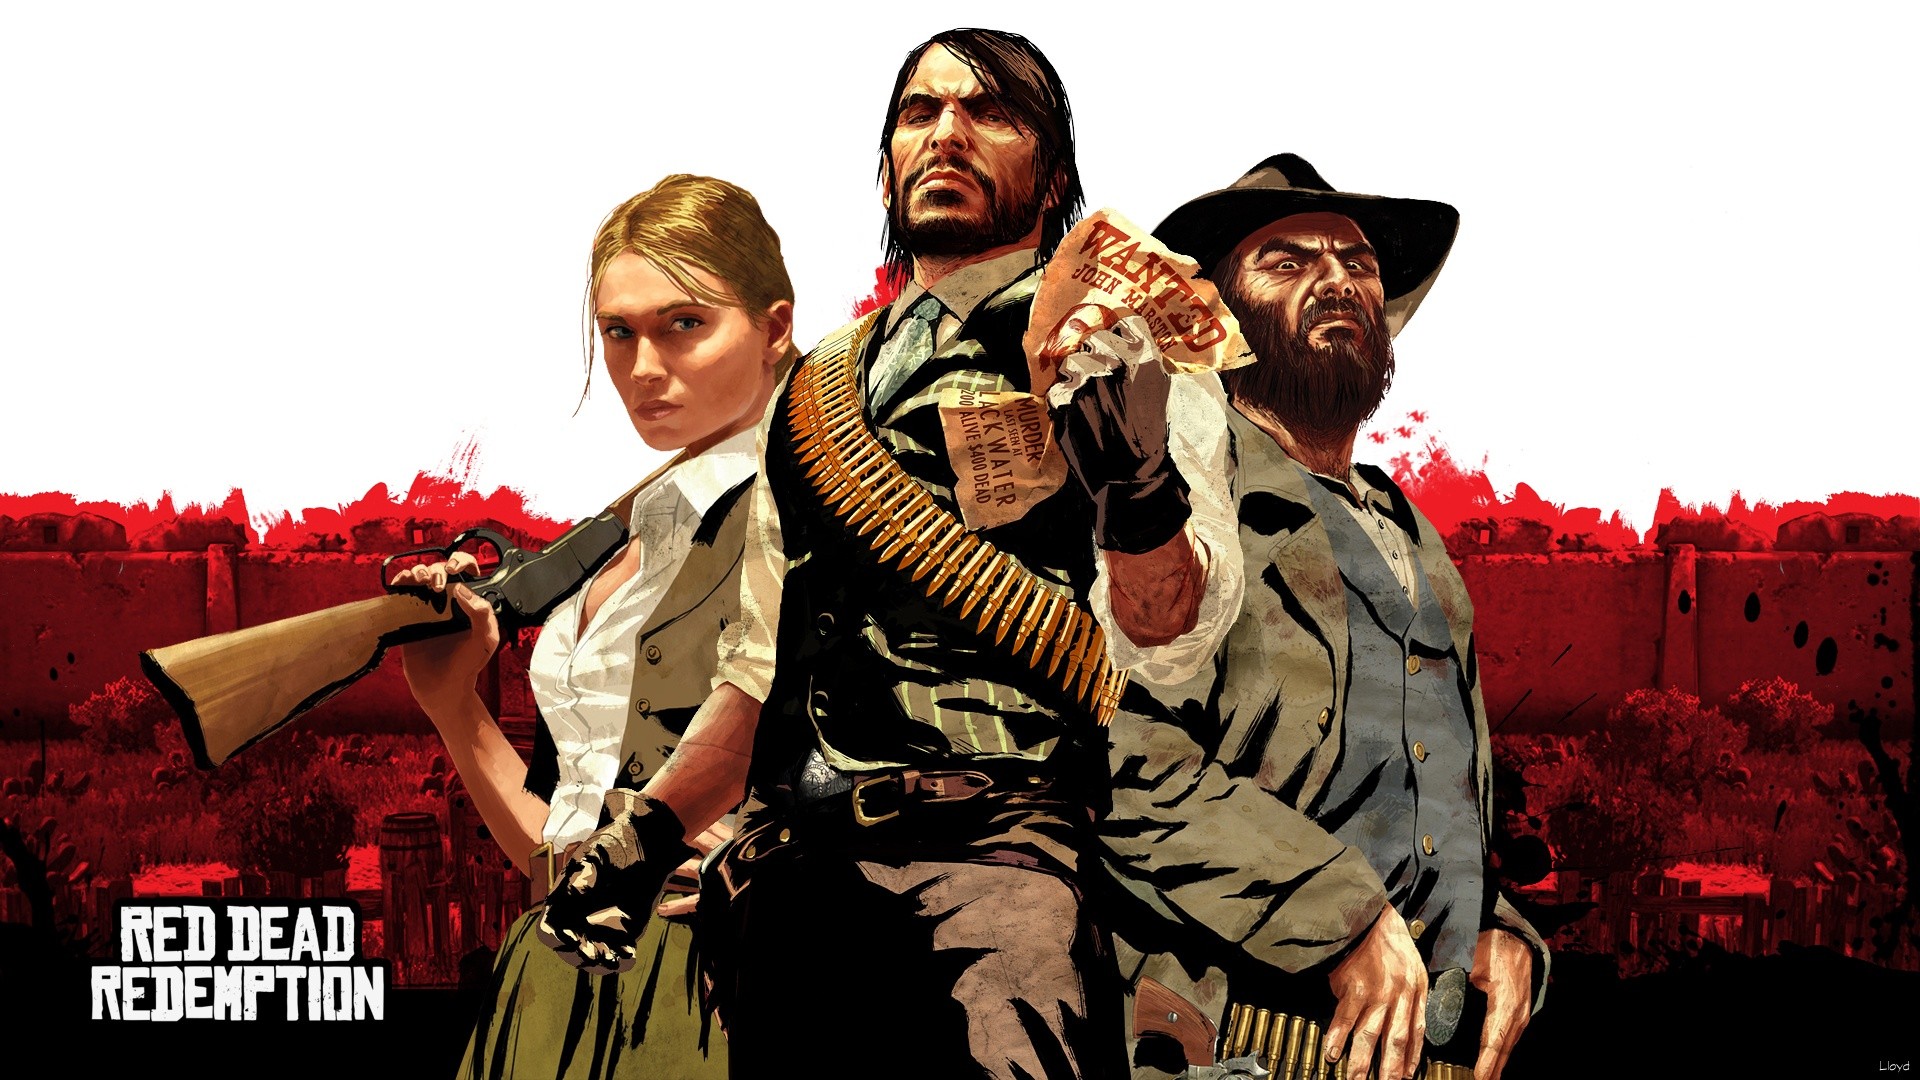 General 1920x1080 Red Dead Redemption John Marston Rockstar Games video games video game characters